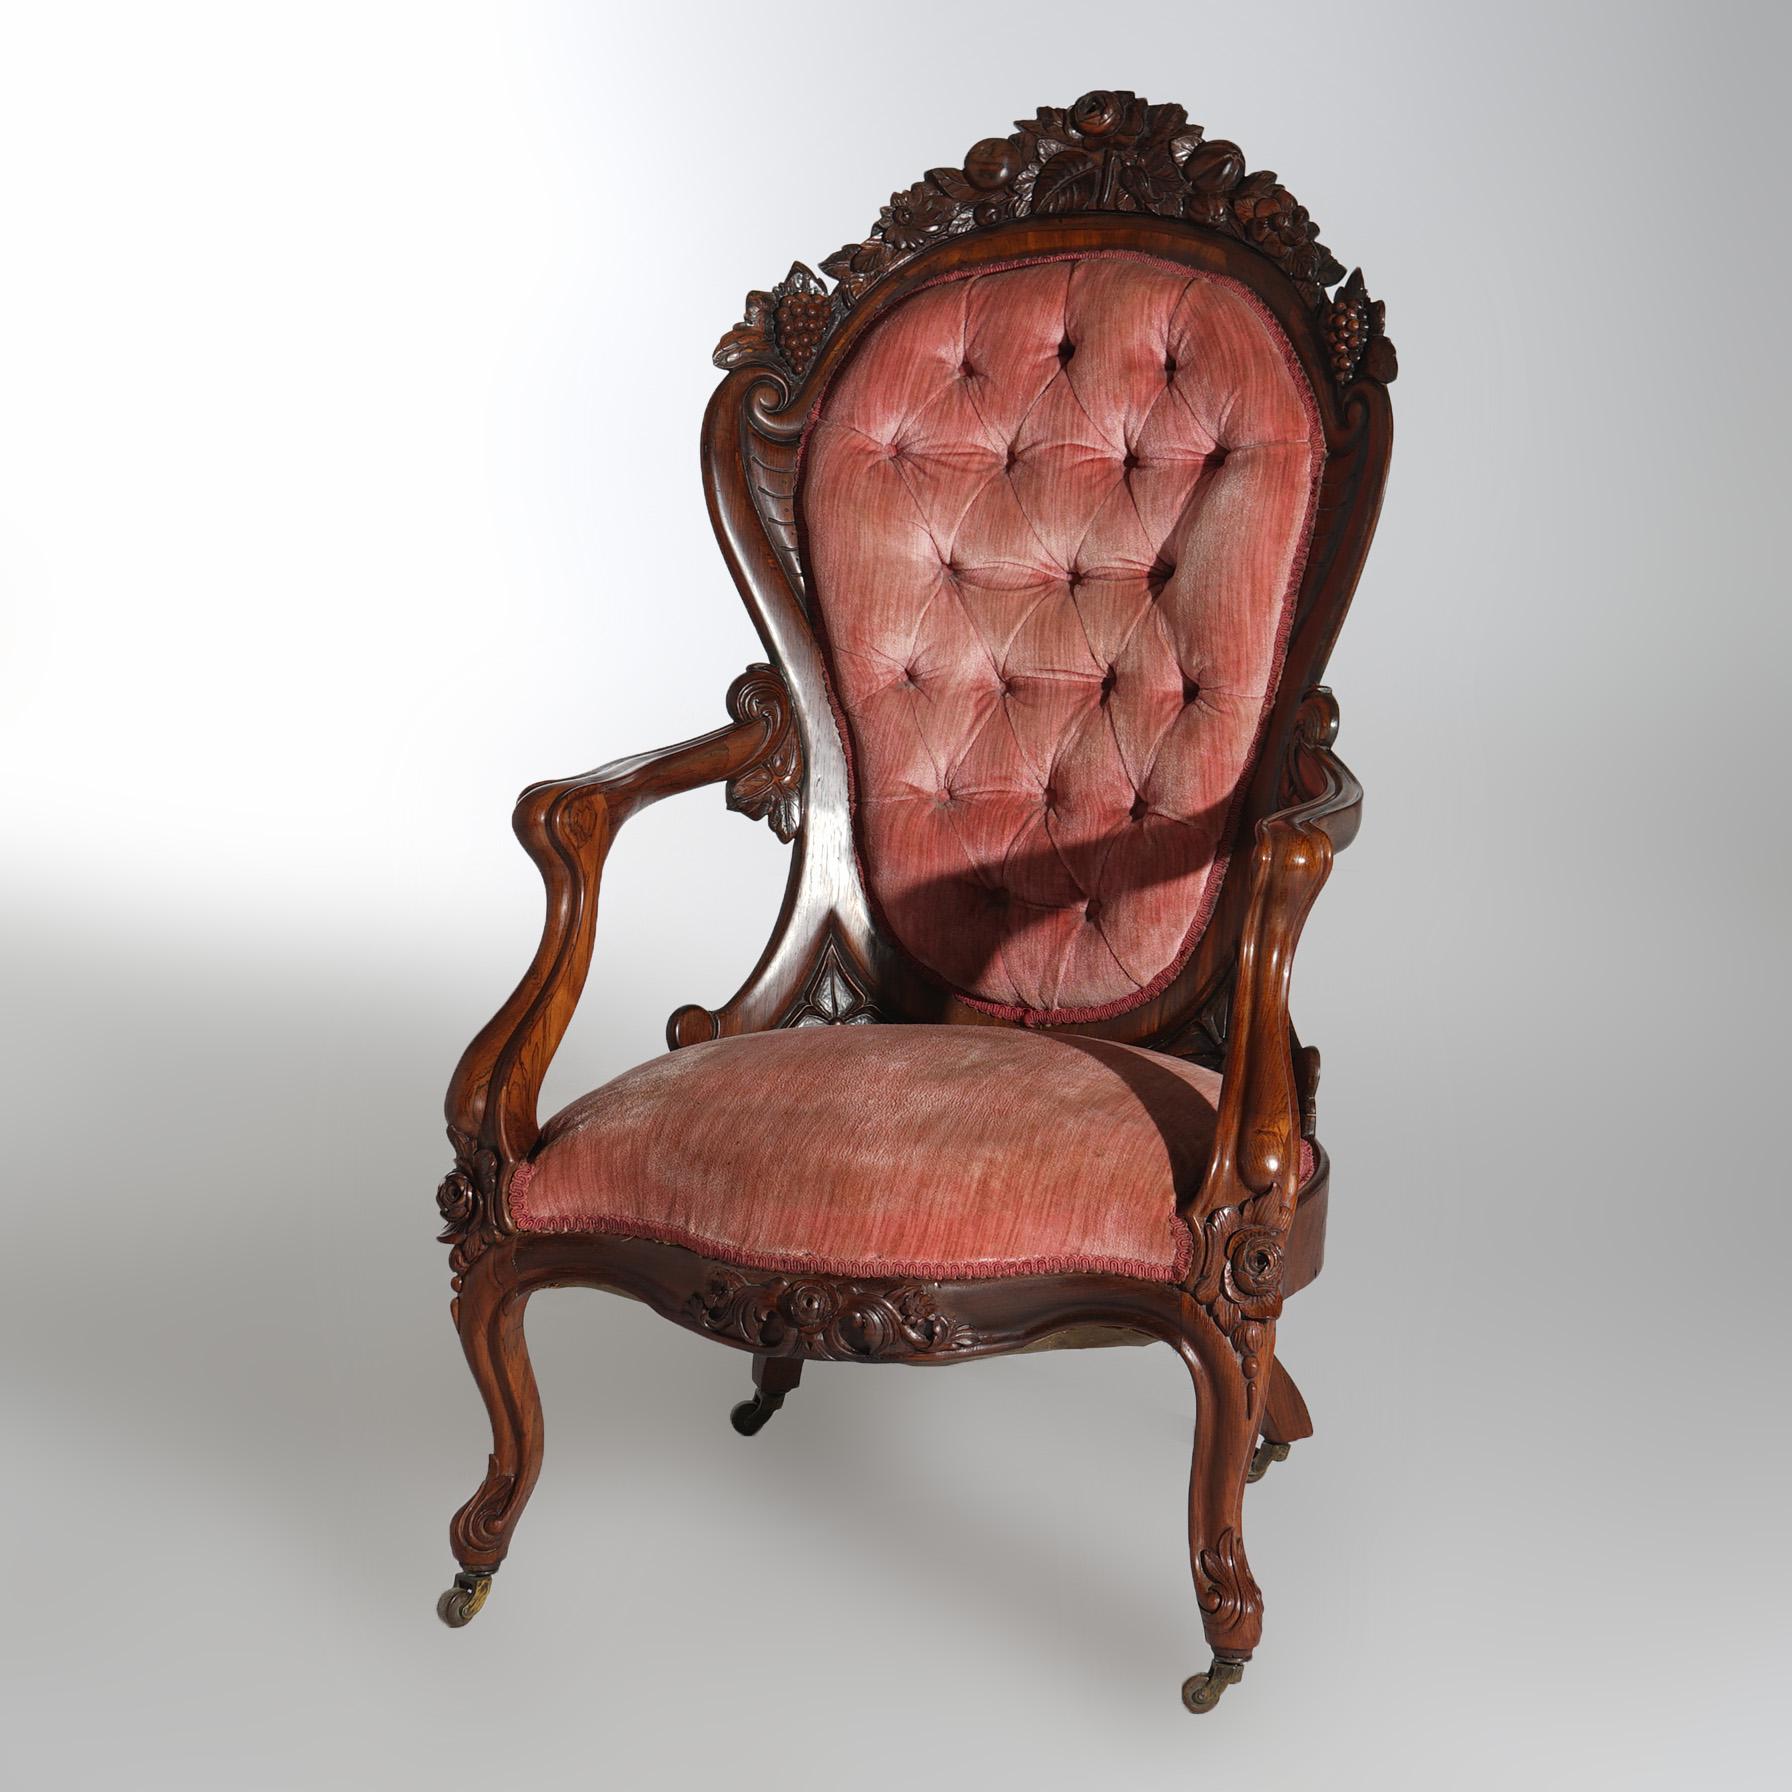 ***Ask About Lower In-House Shipping Rates - Reliable Service & Fully Insured***
An antique Victorian Belter Rococo Rosella armchair offers rosewood construction with carved crest having roses and grapes over upholstered back and seat, raised on